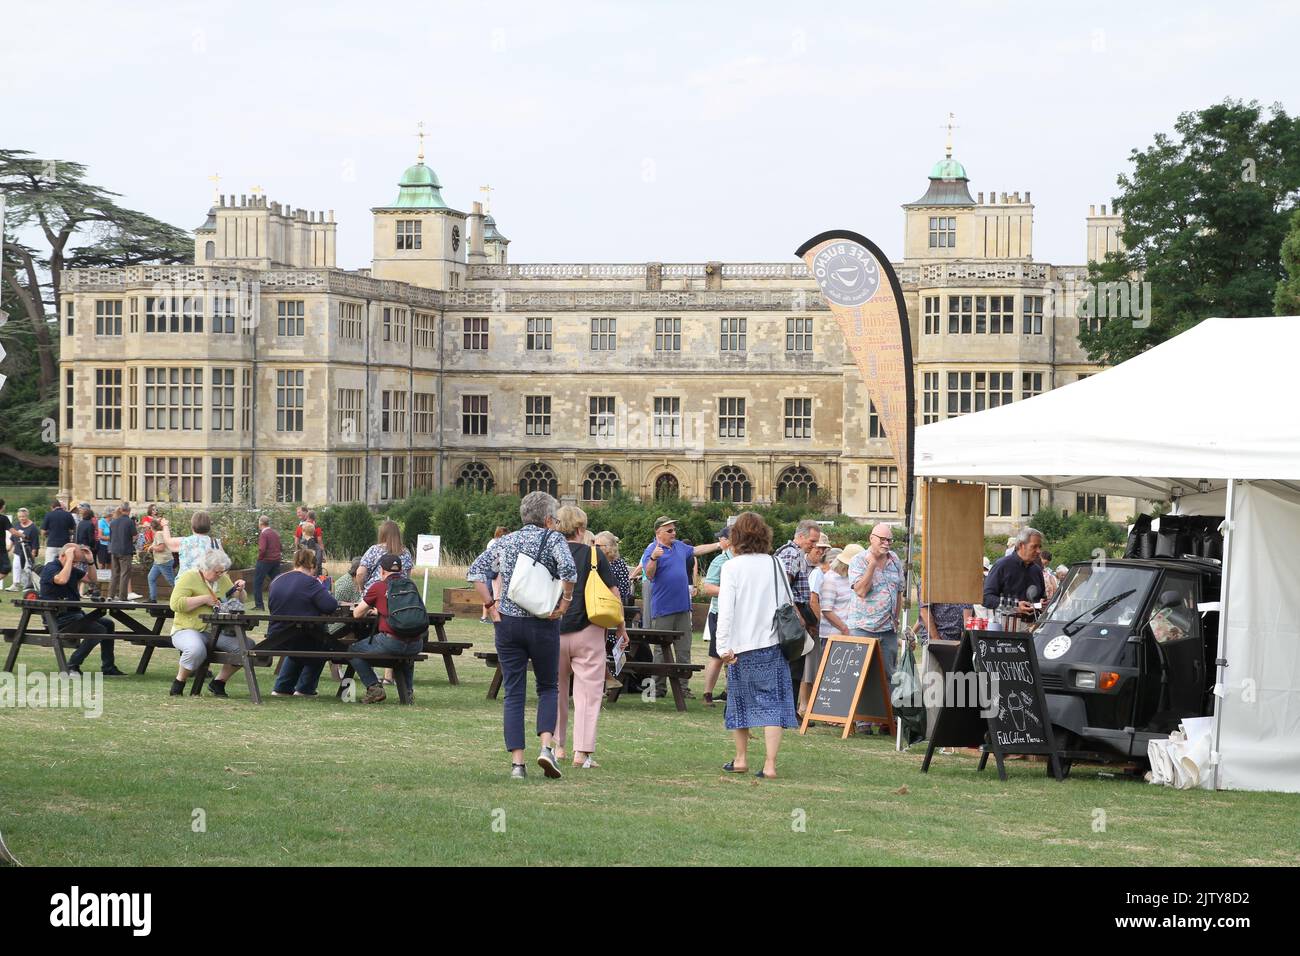 The first ever BBC Gardeners' World Autumn Fair is taking place at Audley End House in Essex. BBC Good Food Market area with plenty of people enjoying the food and drink on offer. Stock Photo